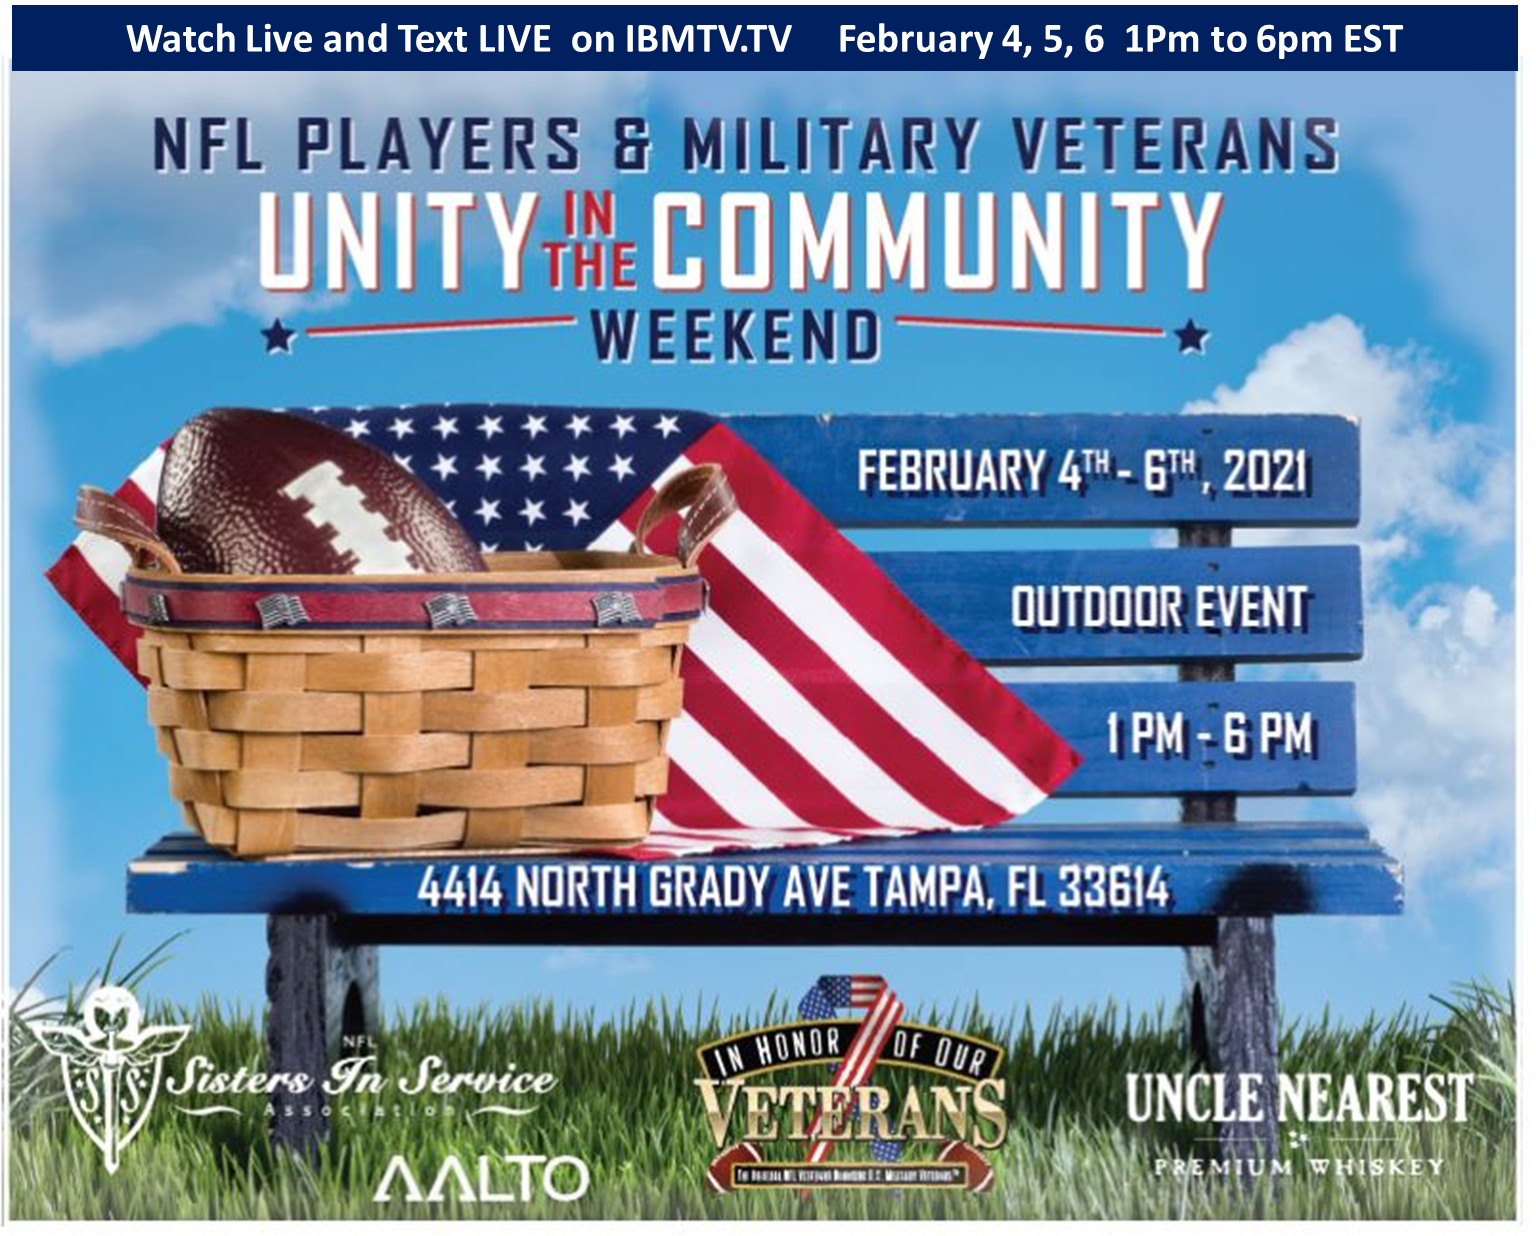 NFL Veterans to Give Awards to Military Veterans in Tampa This Week